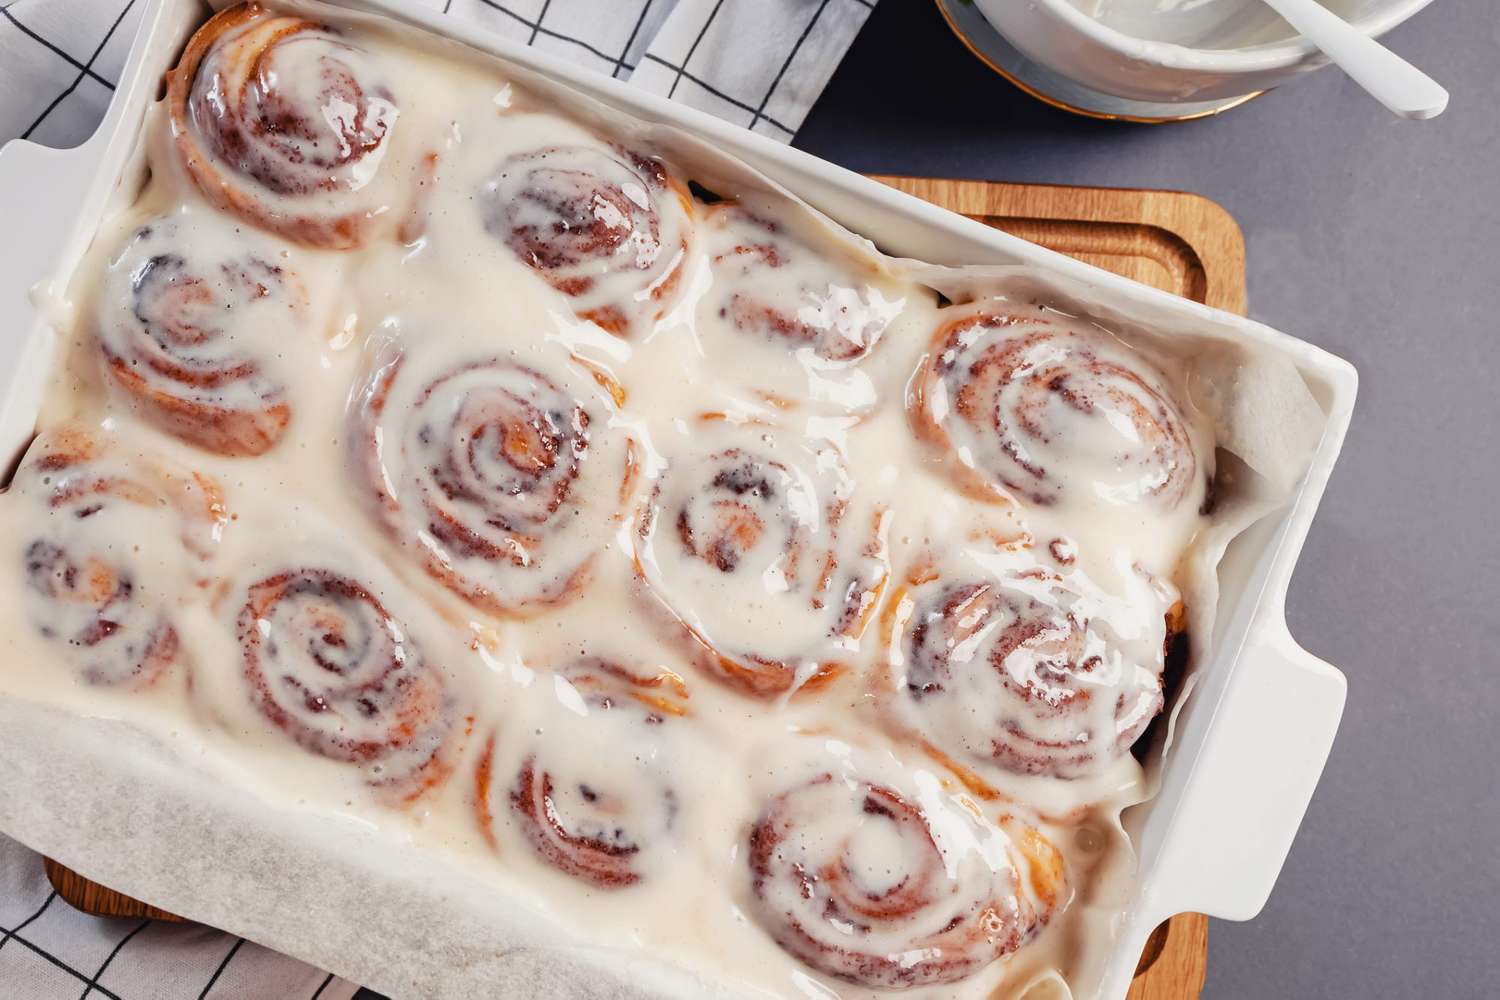 How To Store Cinnamon Rolls After Baking